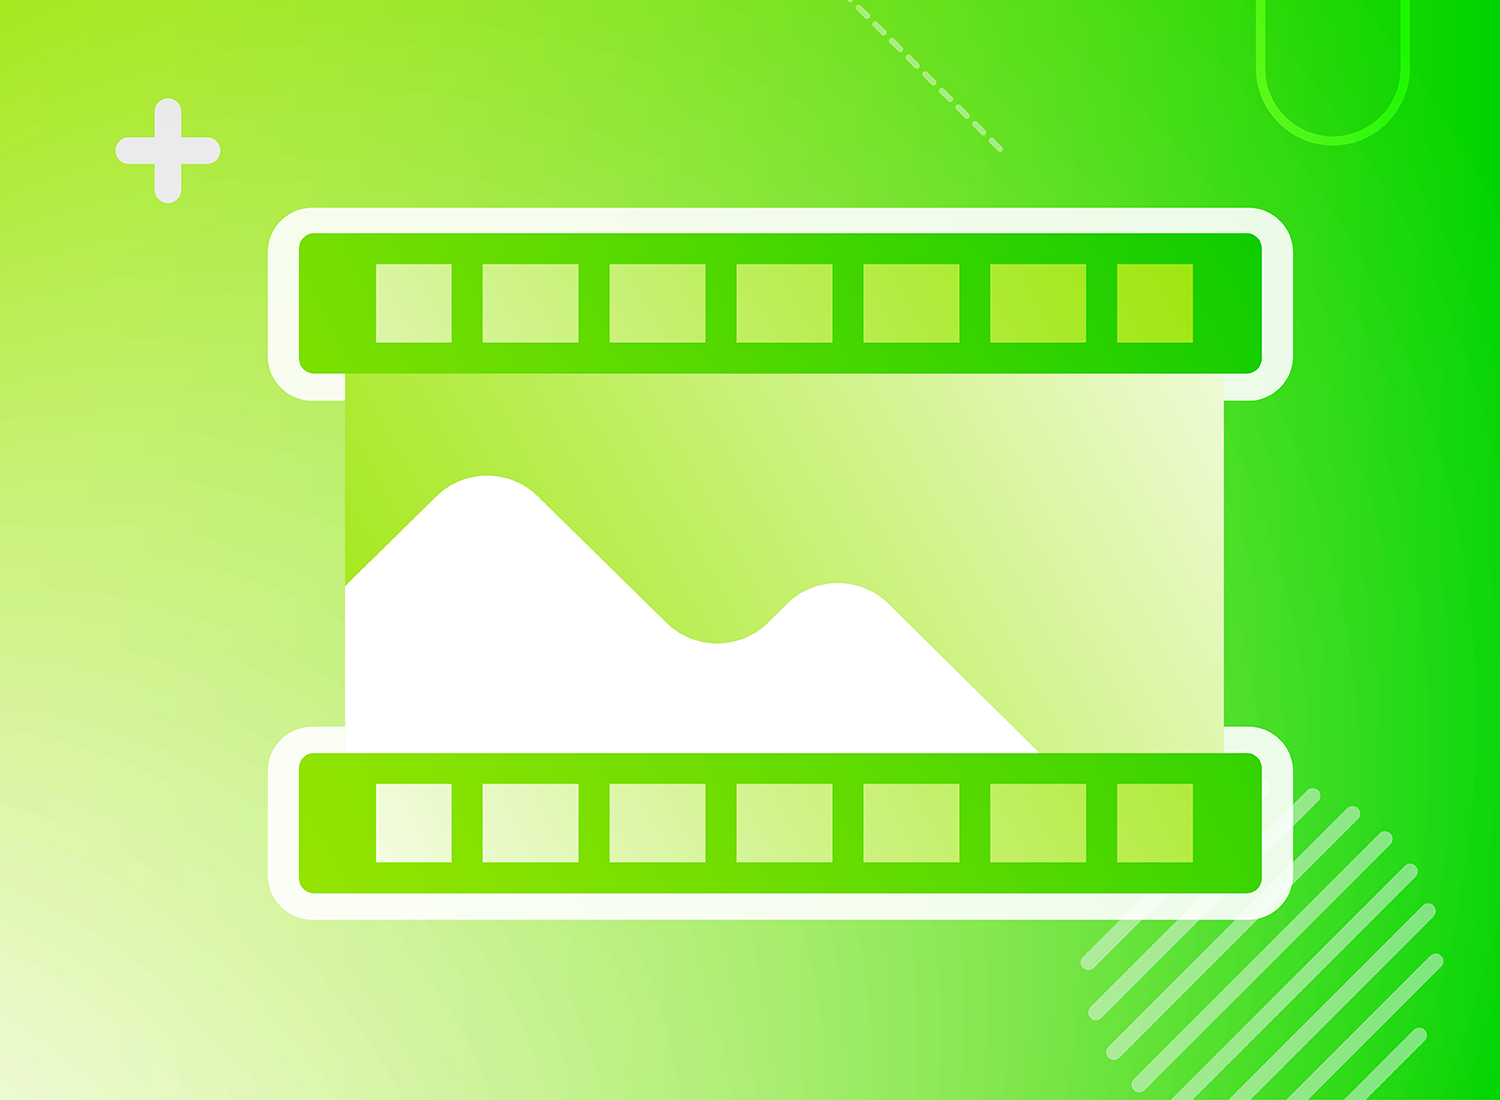 Minimalist graphic of a video editing concept showing an abstract representation of a filmstrip on a bright green background. The filmstrip frames a mountain-like image, symbolizing video content. This simple and modern design may be used for educational material related to adding bumpers or intros and outros in video production, with a focus on ease and accessibility in video editing tutorials.